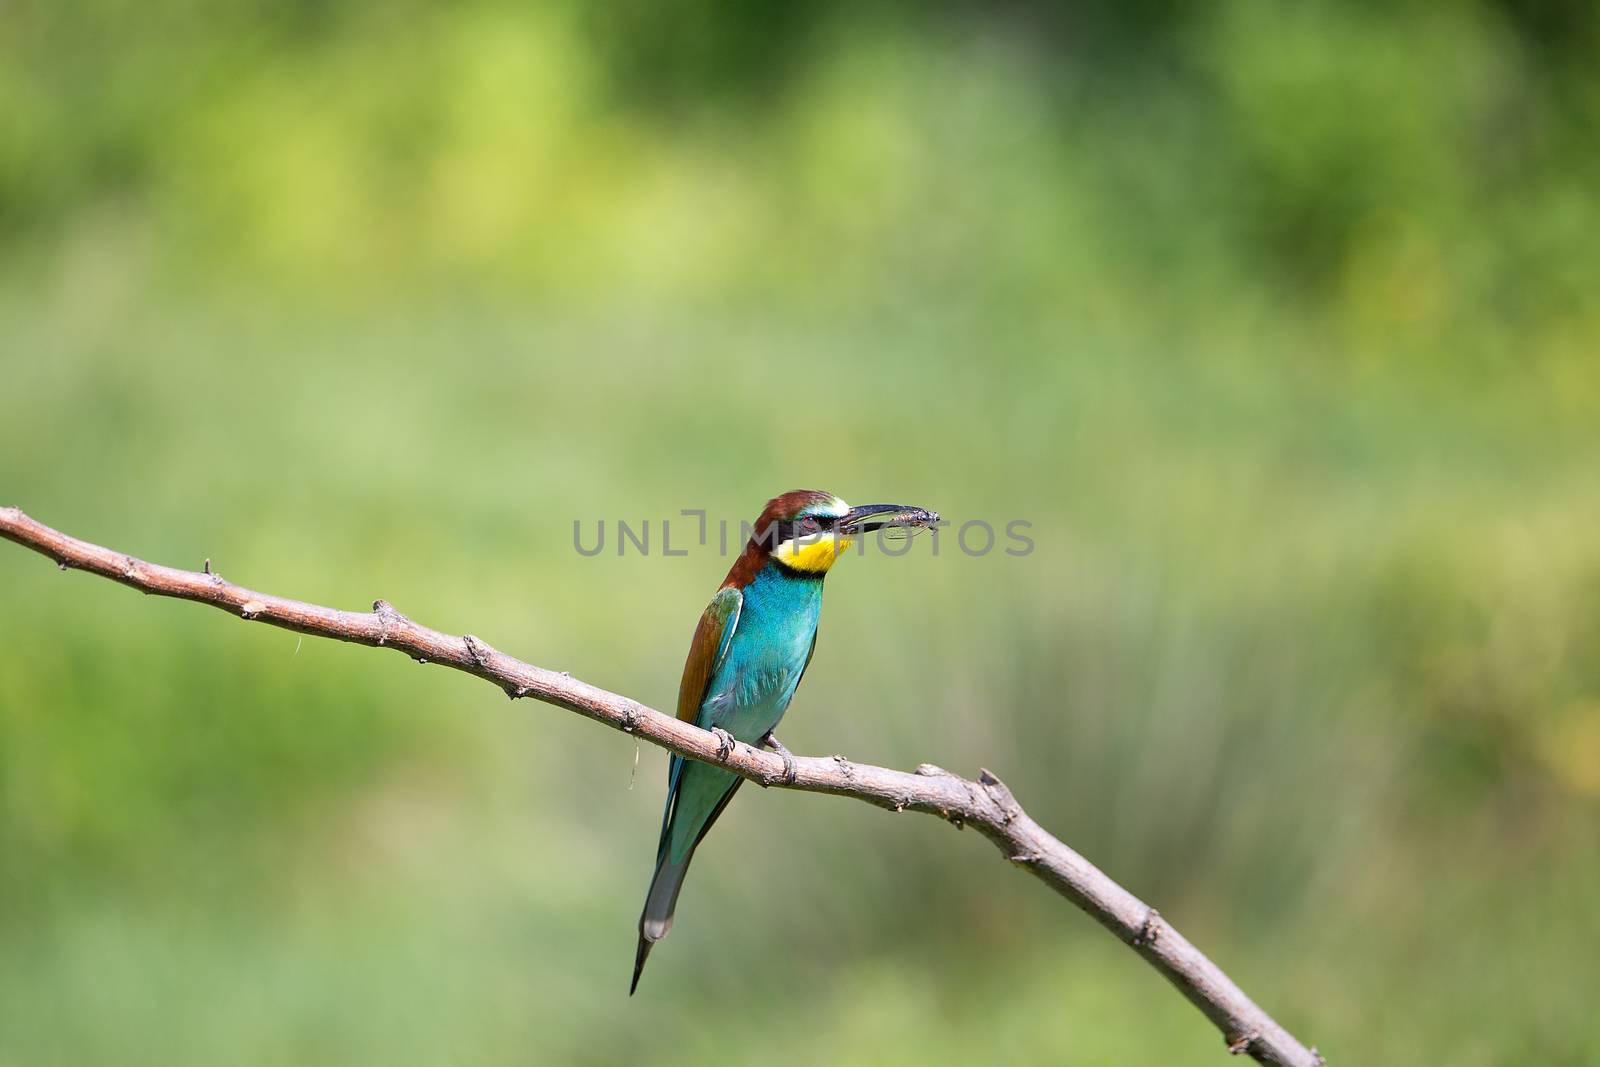 European Bee-eater with dragonfly (Merops apiaster) by Tanja_g